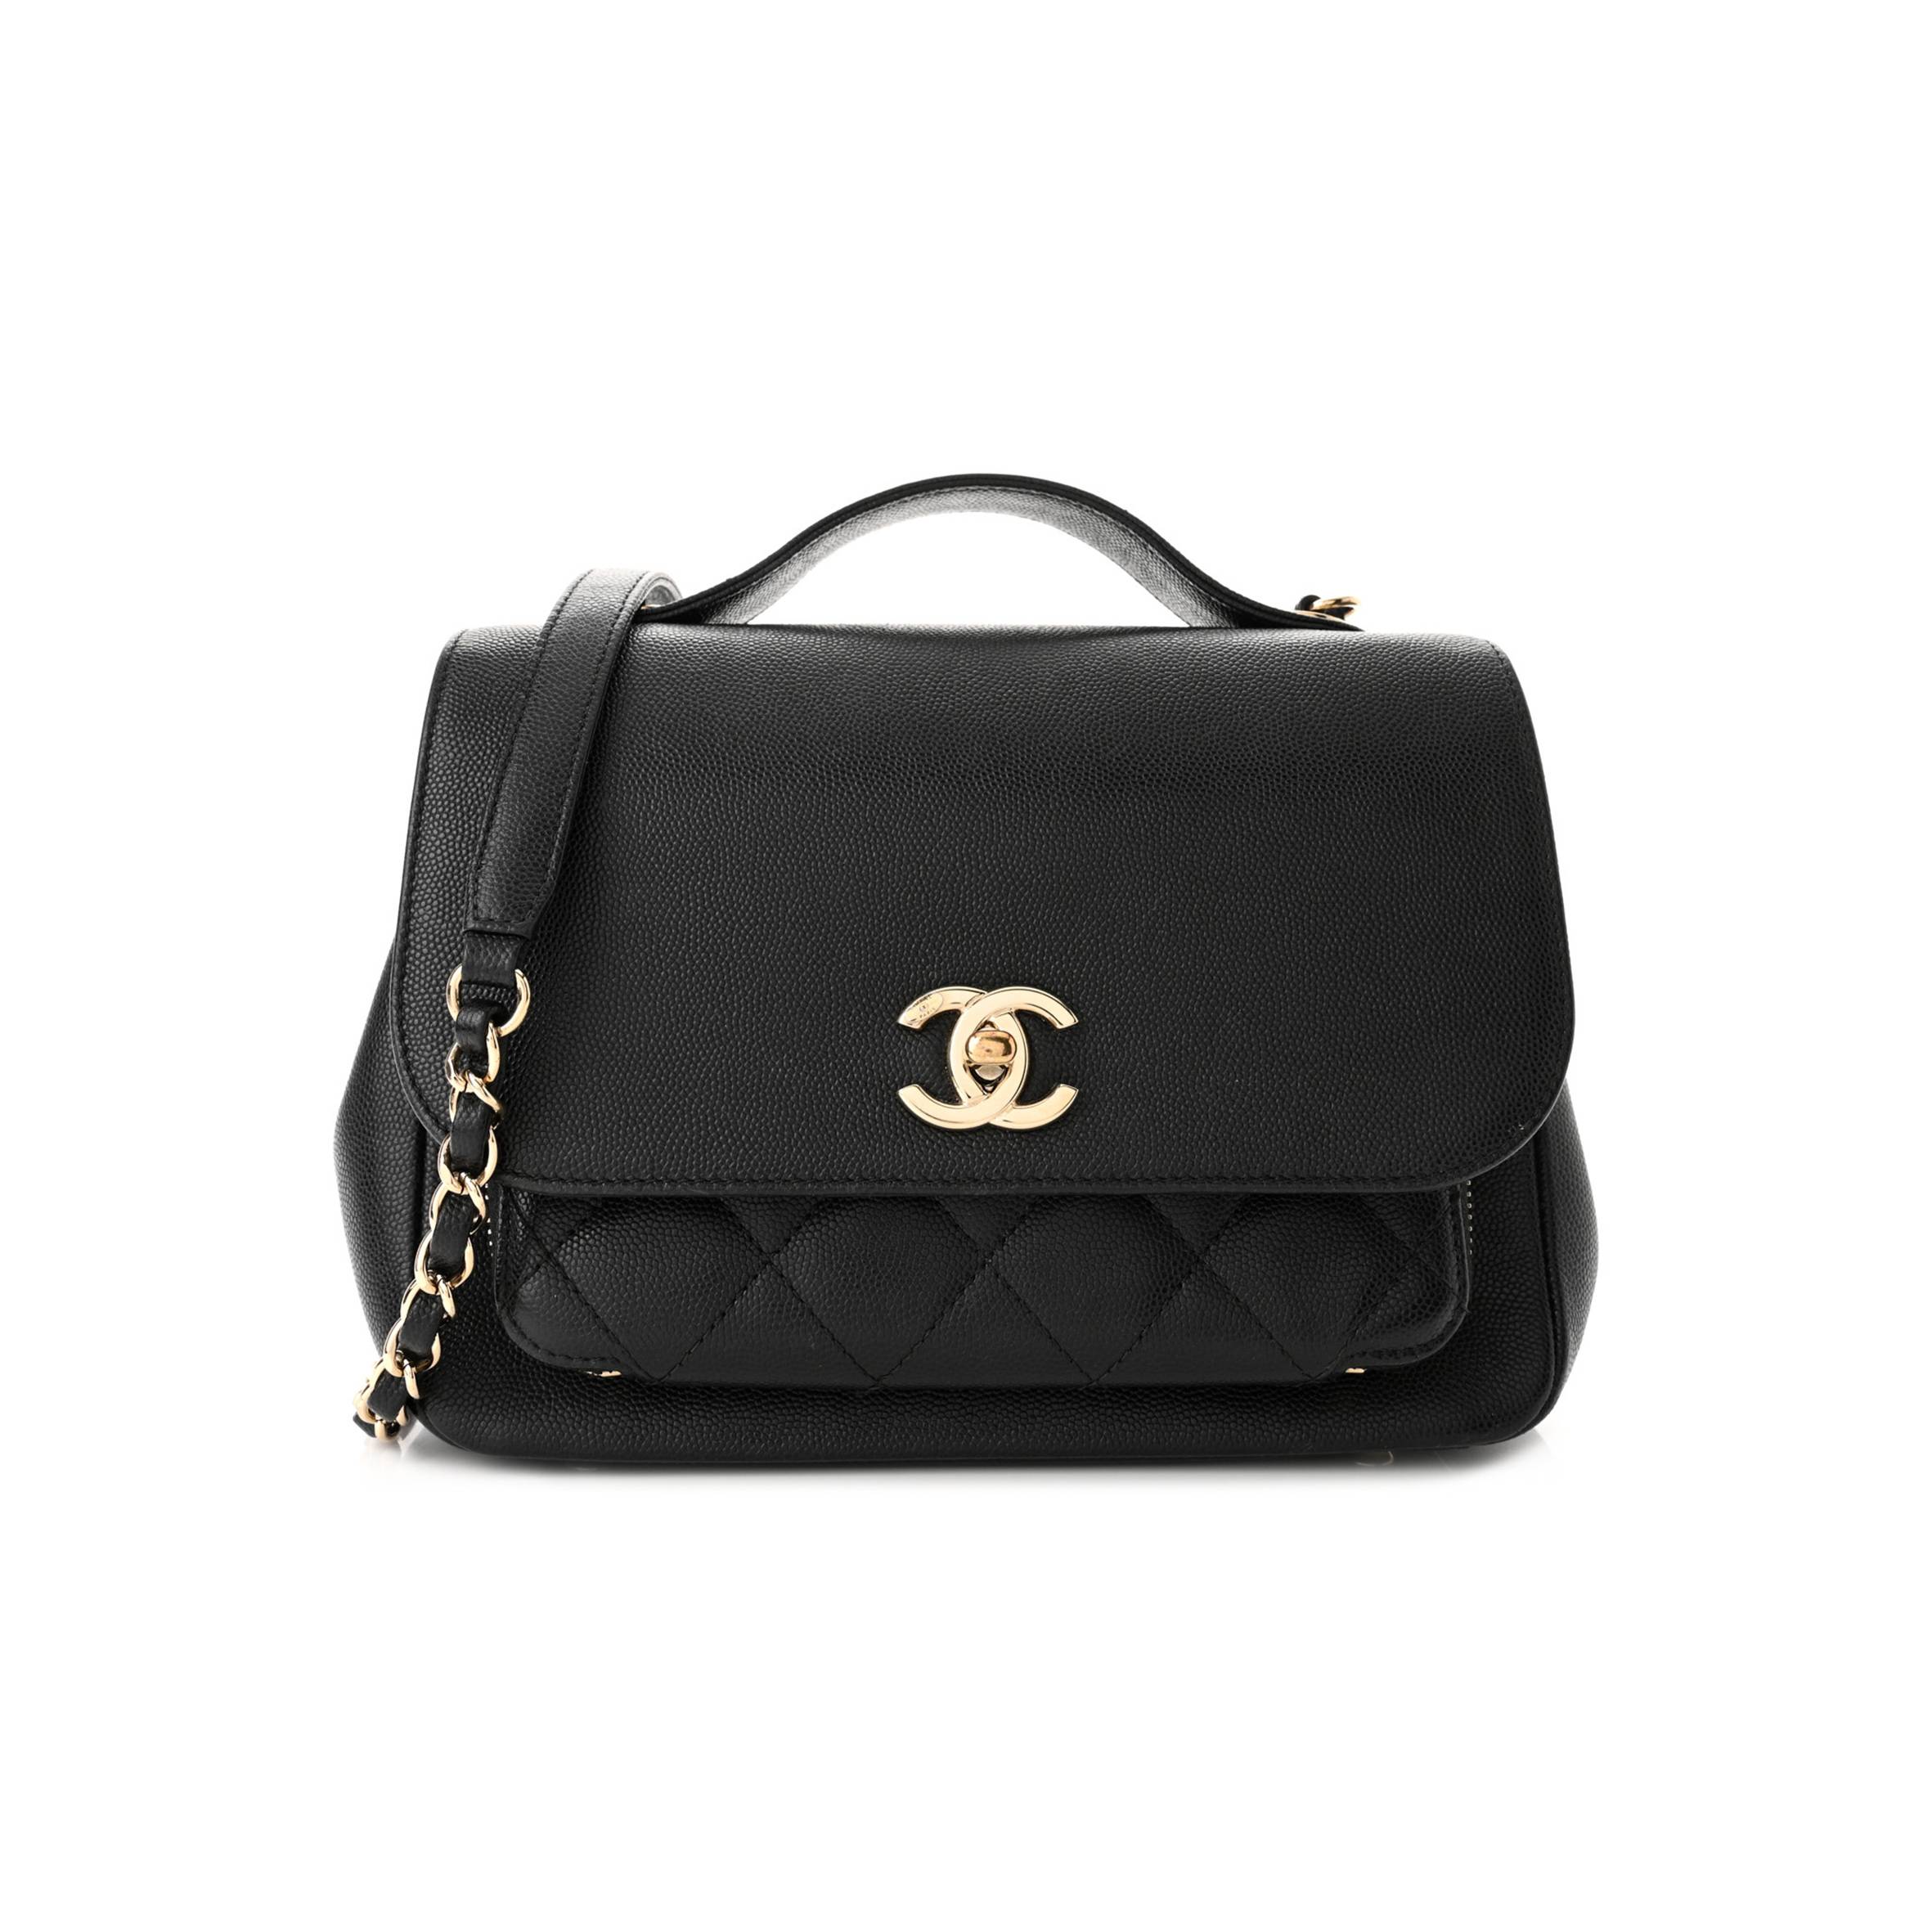 CHANEL CAVIAR QUILTED MEDIUM BUSINESS AFFINITY FLAP BLACK ROSE GOLD HARDWARE (22*17*7cm)